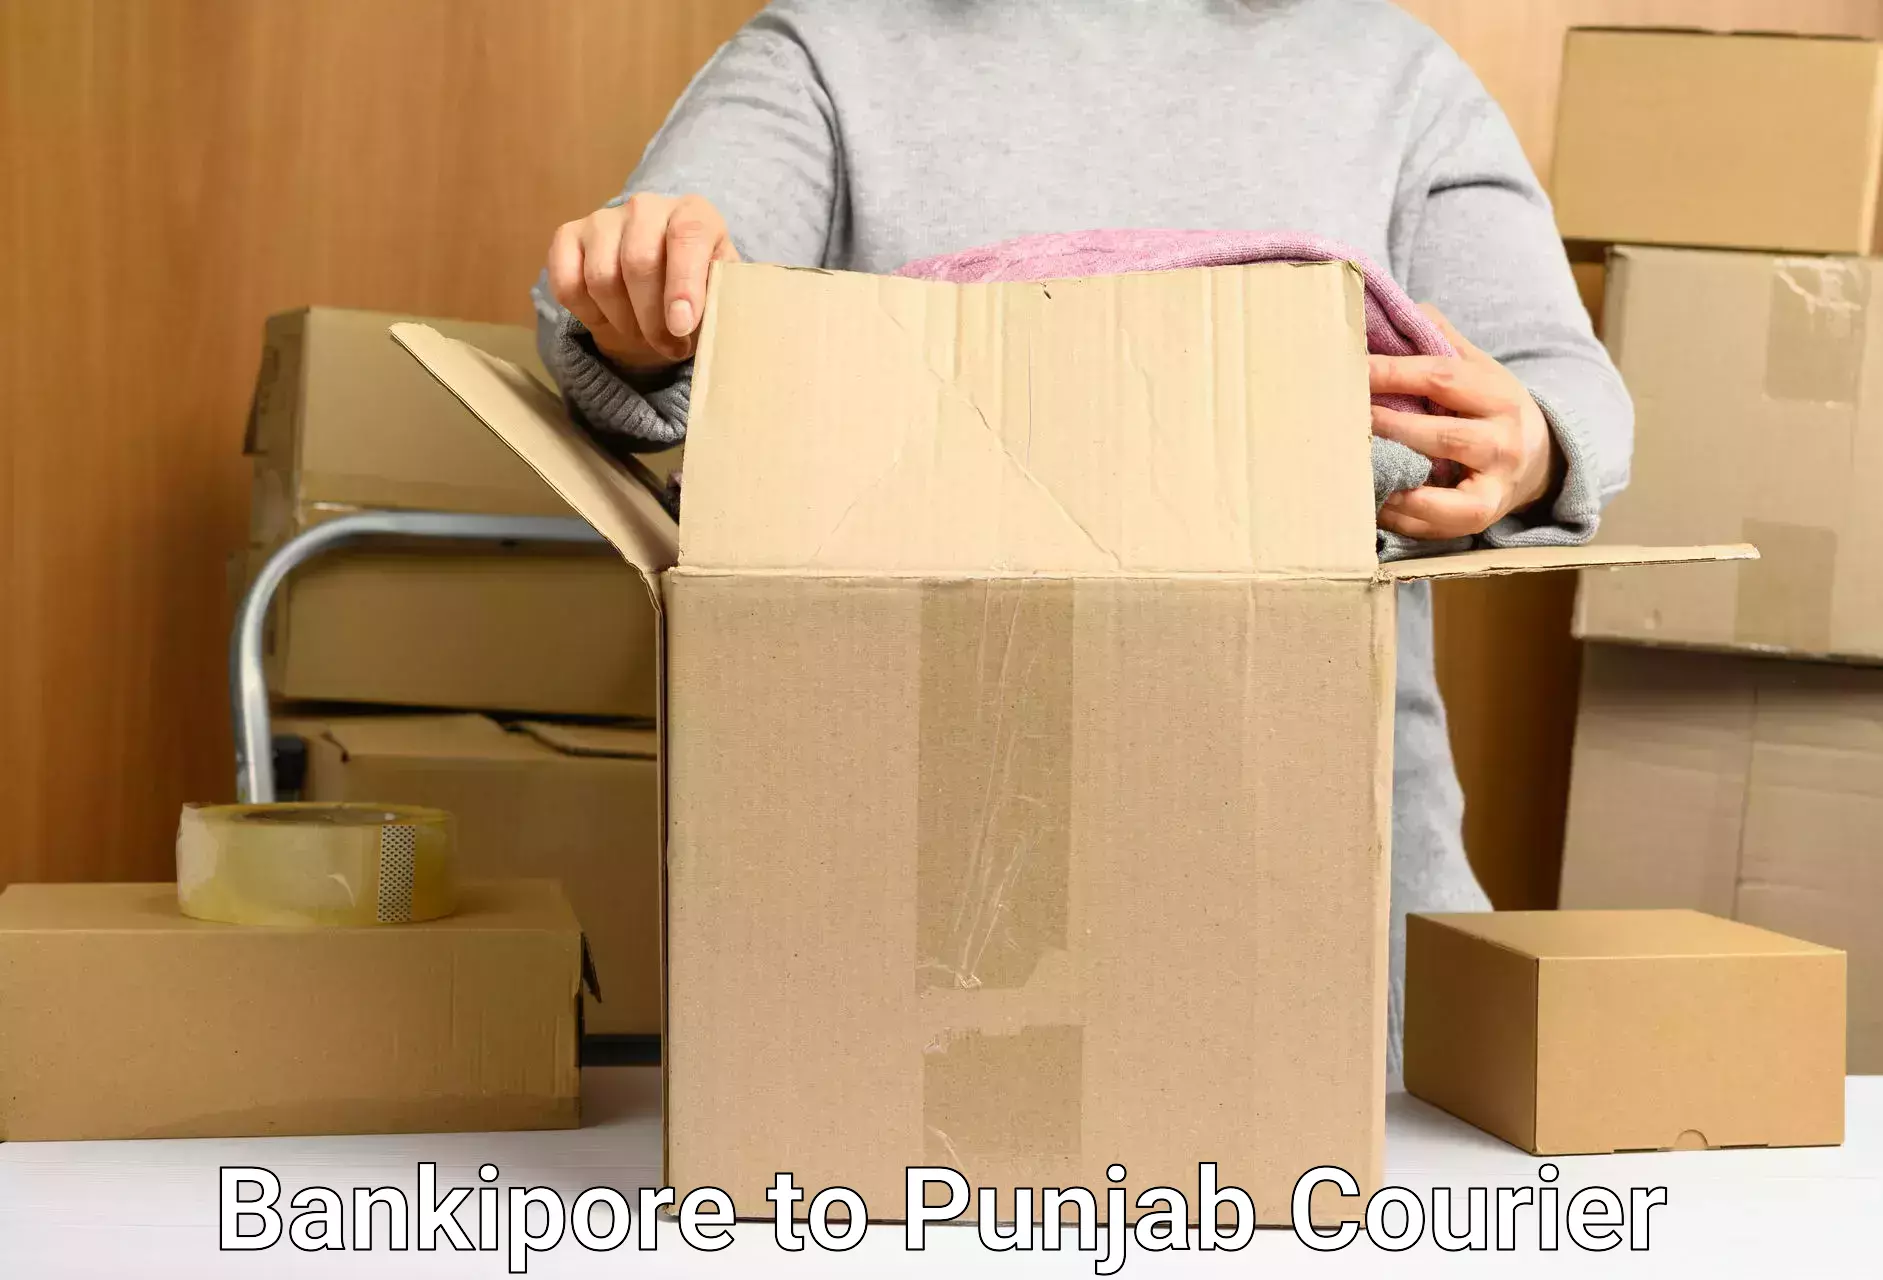 Weekend courier service Bankipore to Ajnala